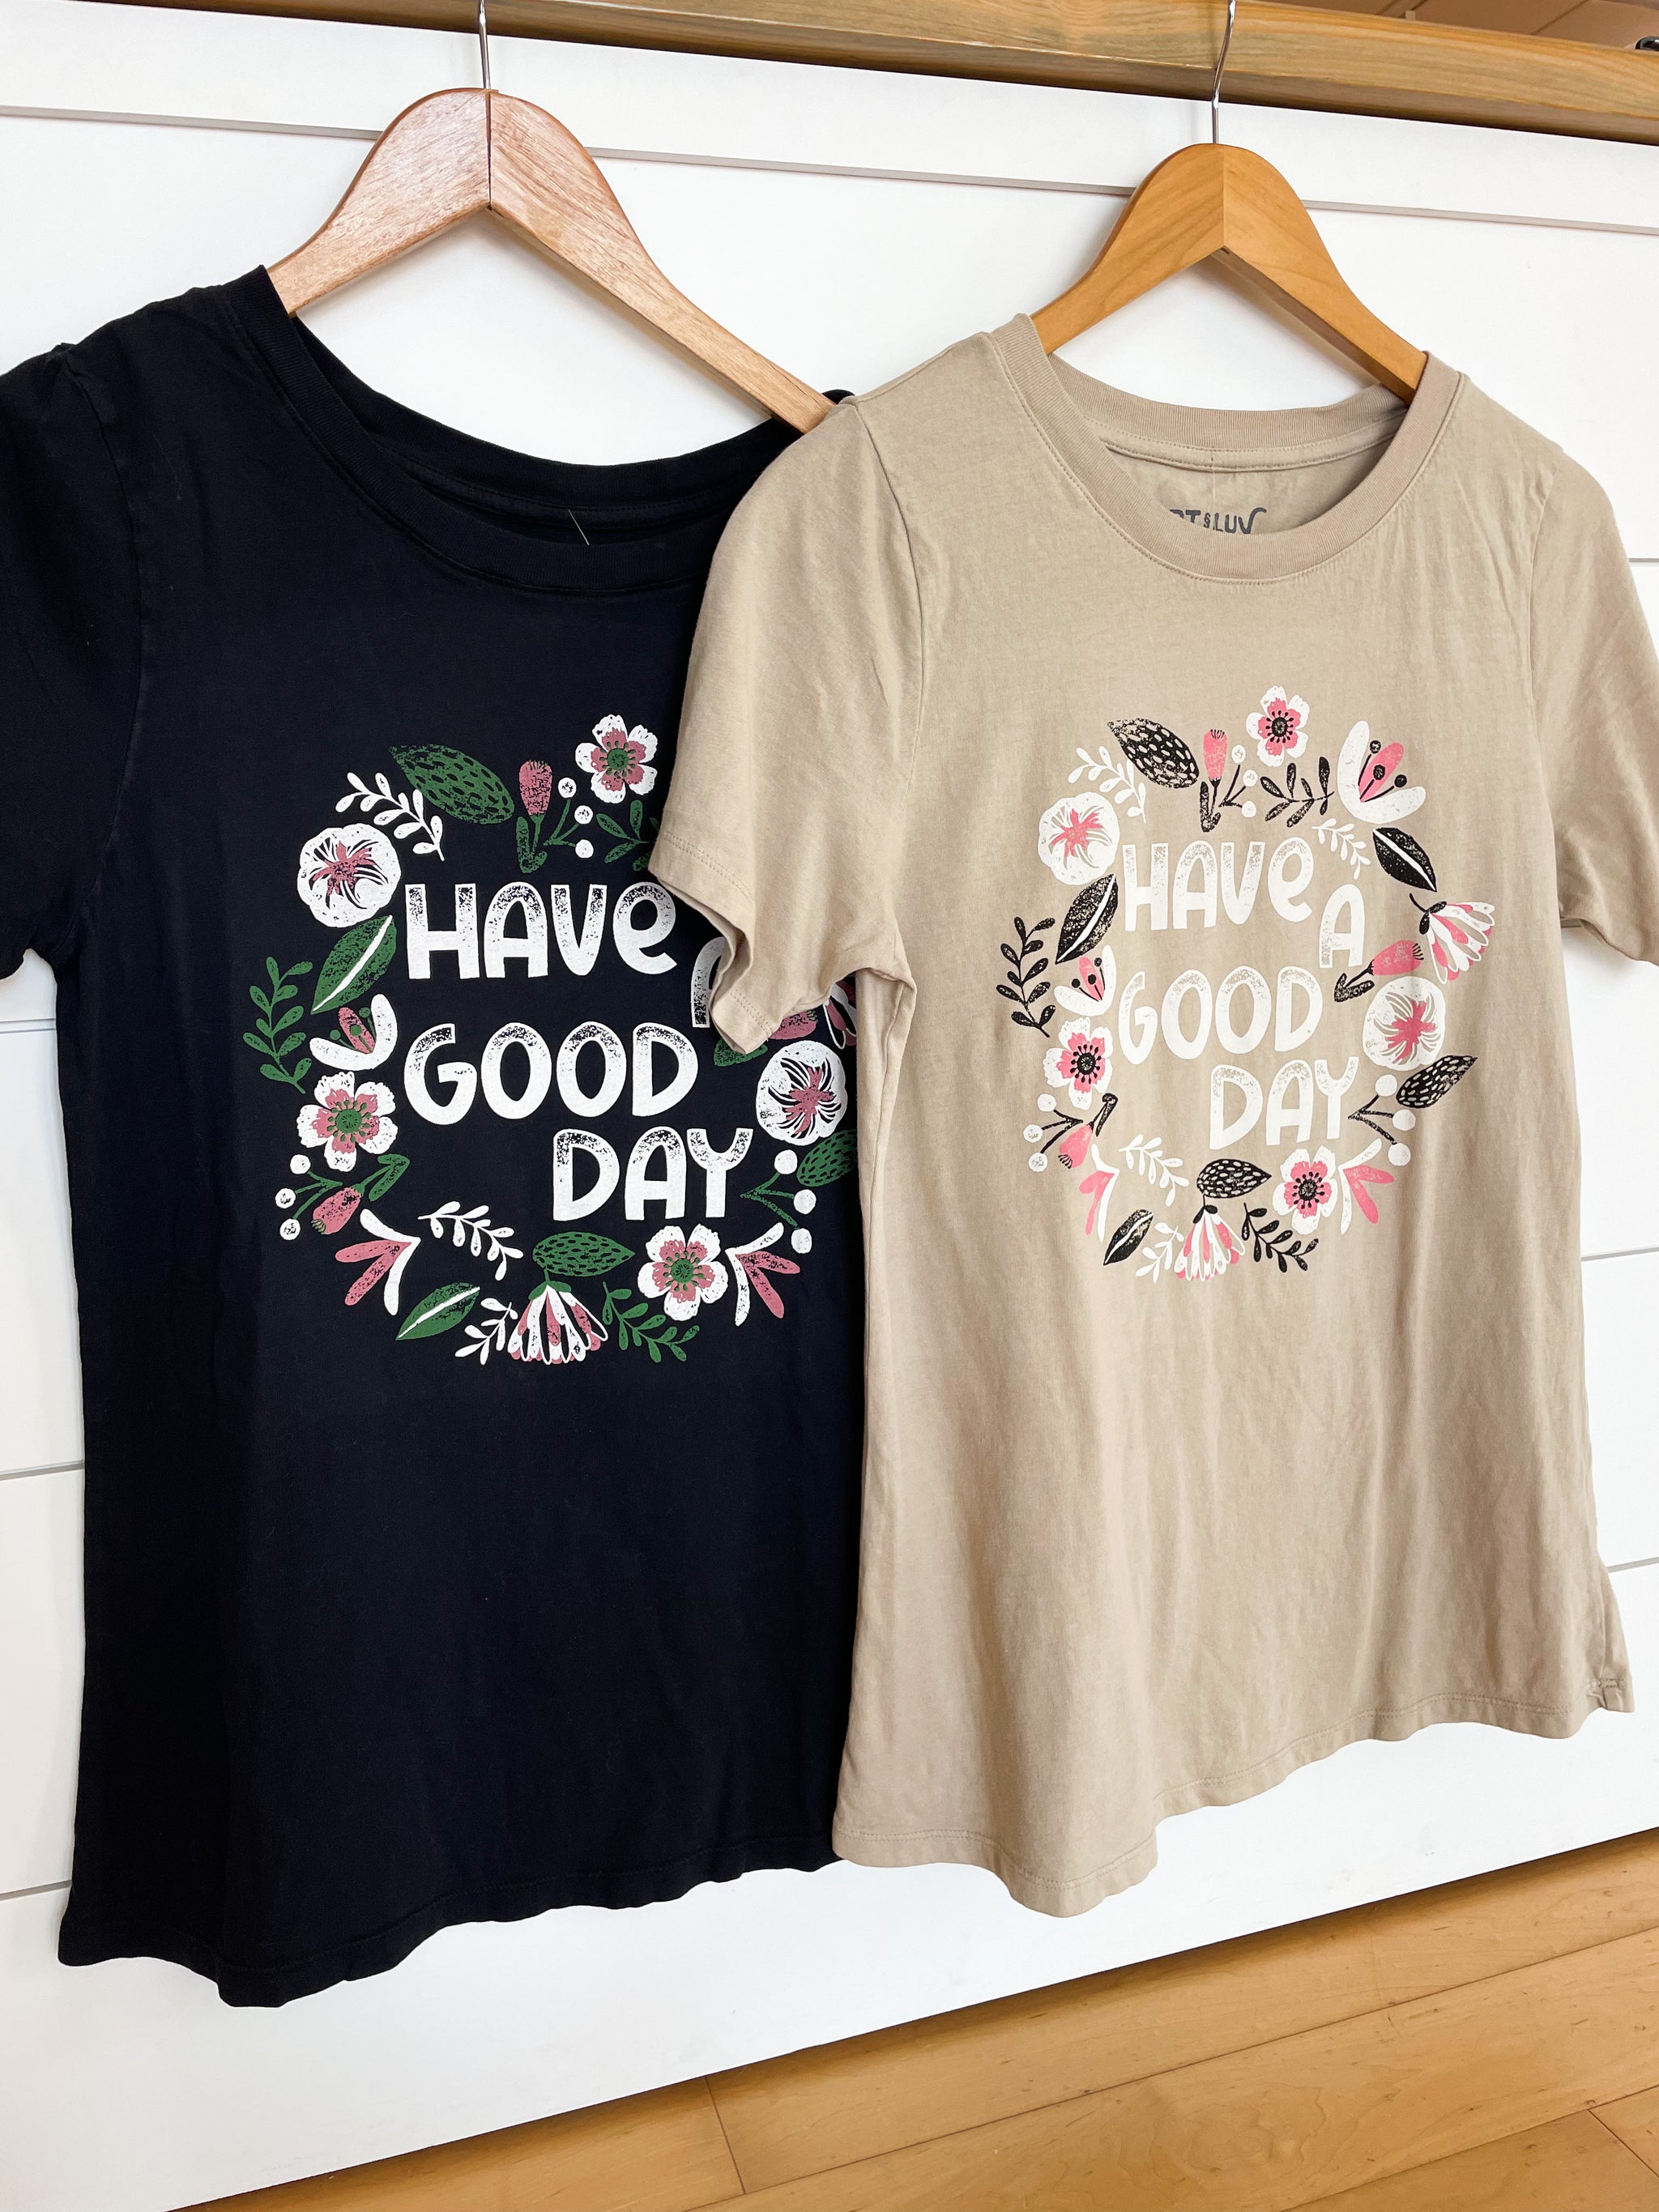 "Have a Good Day" Graphic Tee